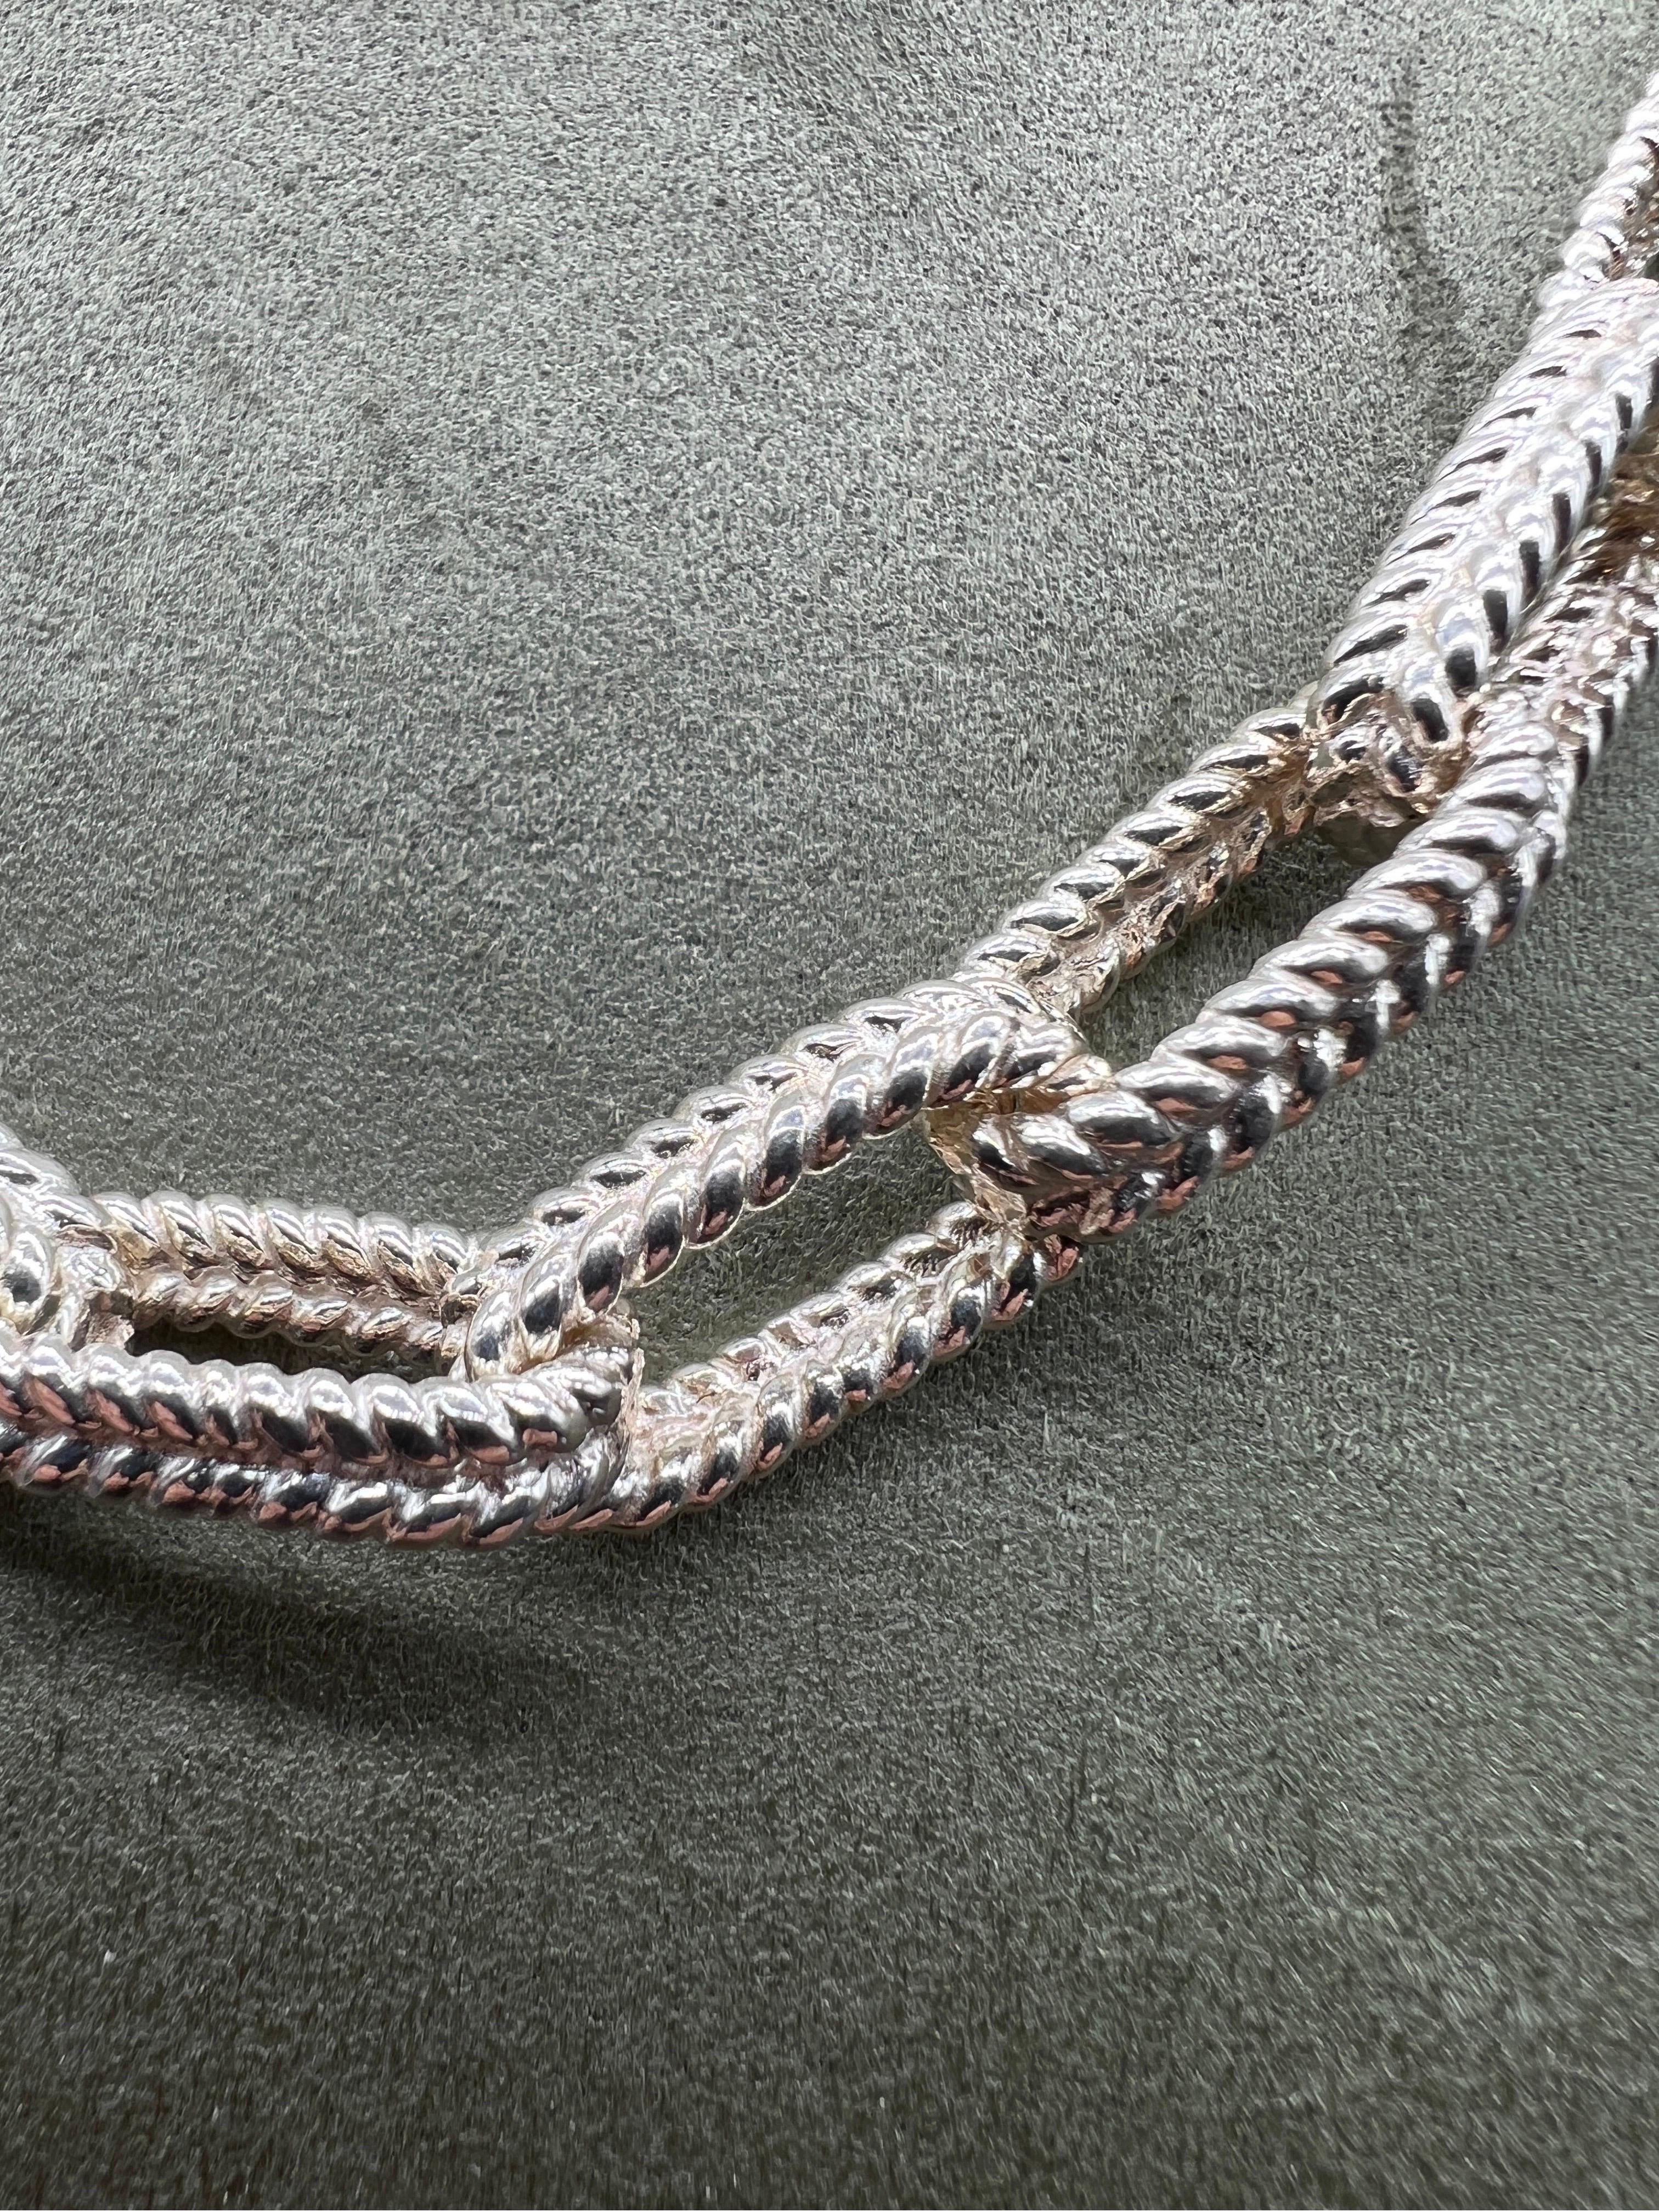 Discover this superb 925/1000 silver chain that combines quality, style and refinement. With its large braided links and elegant design, it's the perfect accessory to complete your jewellery collection. The links on this chain are specially designed